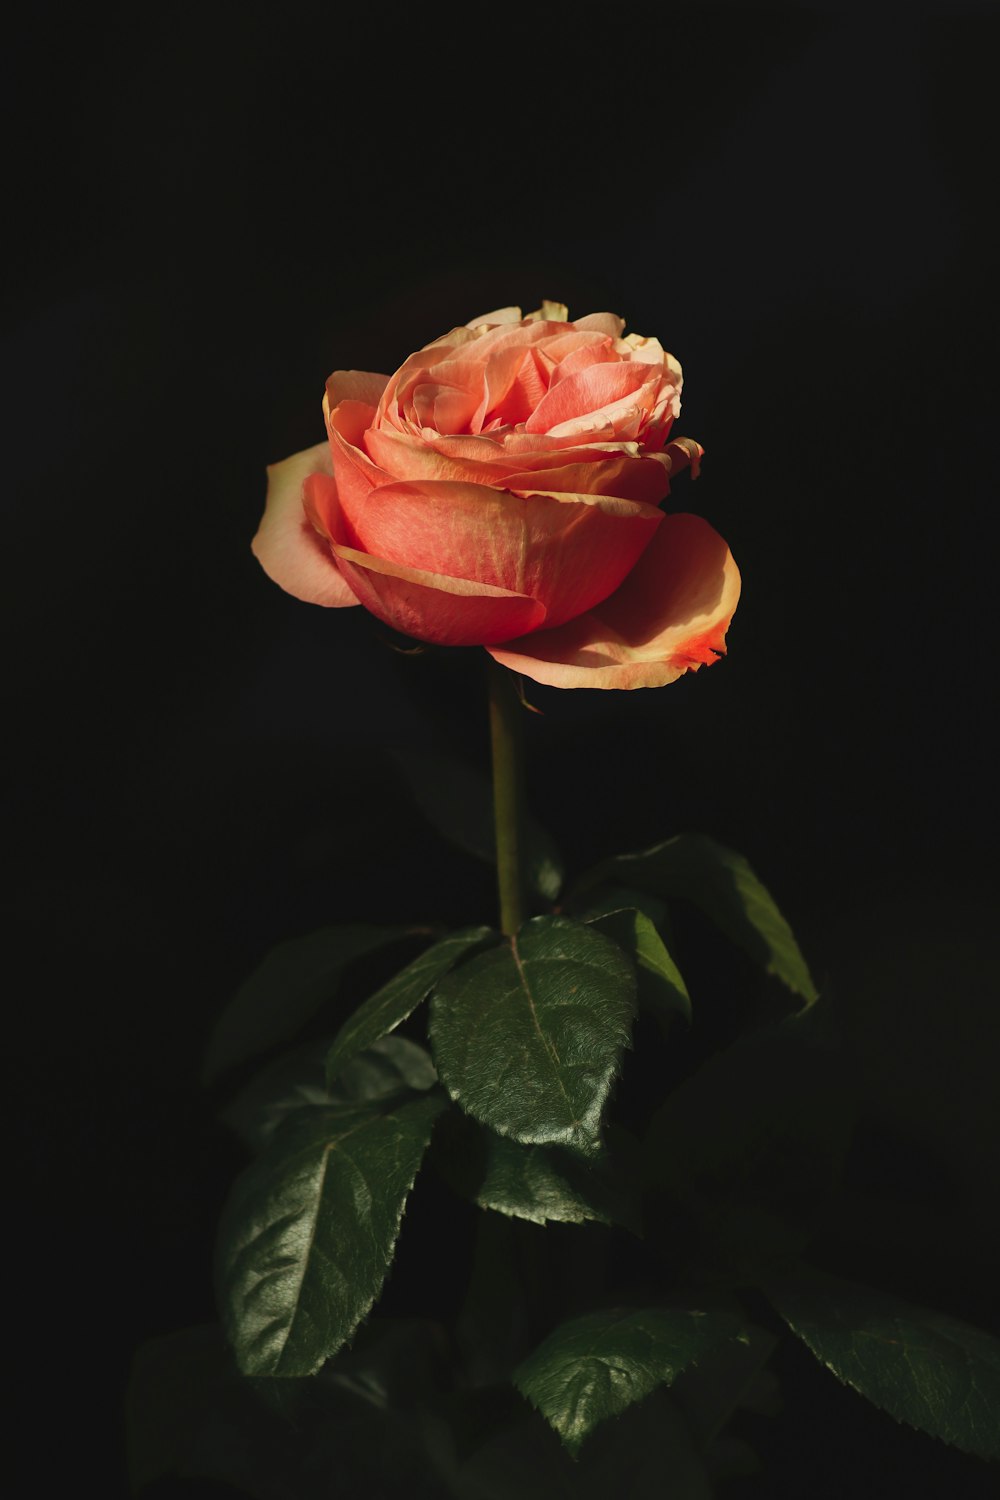 a single pink rose with green leaves on a black background